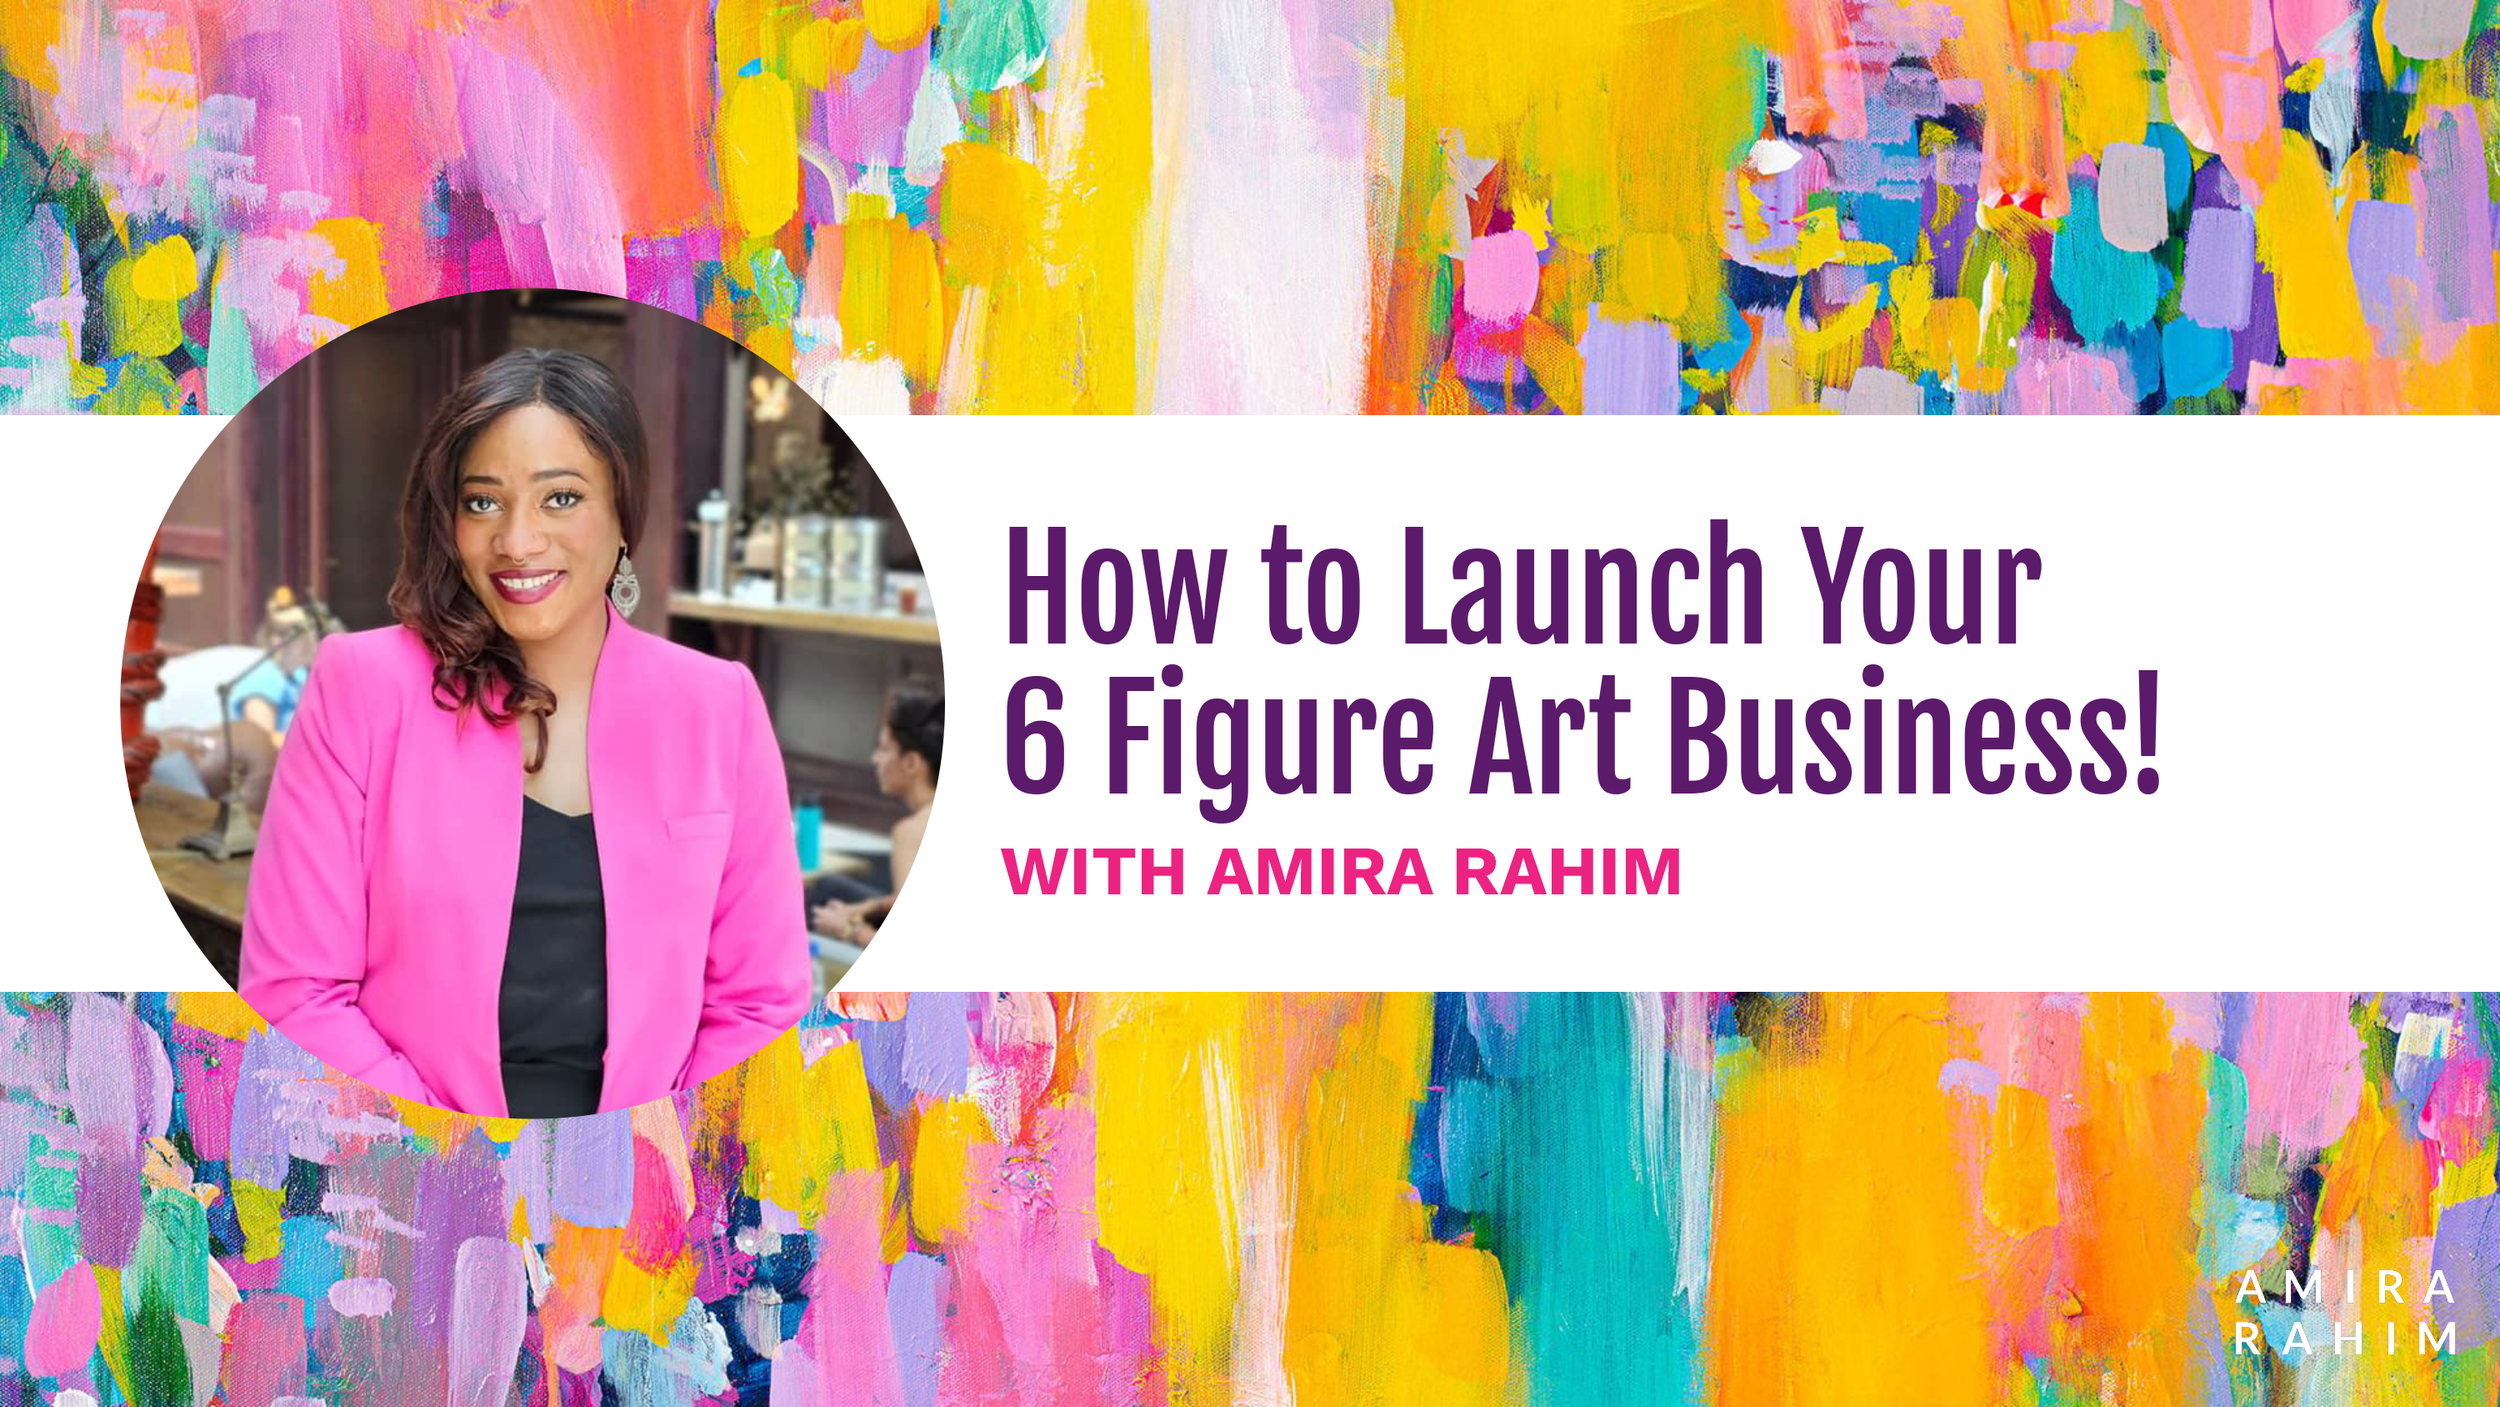 How-to-Launch-Your-6-Figure-Art-Business-1.png